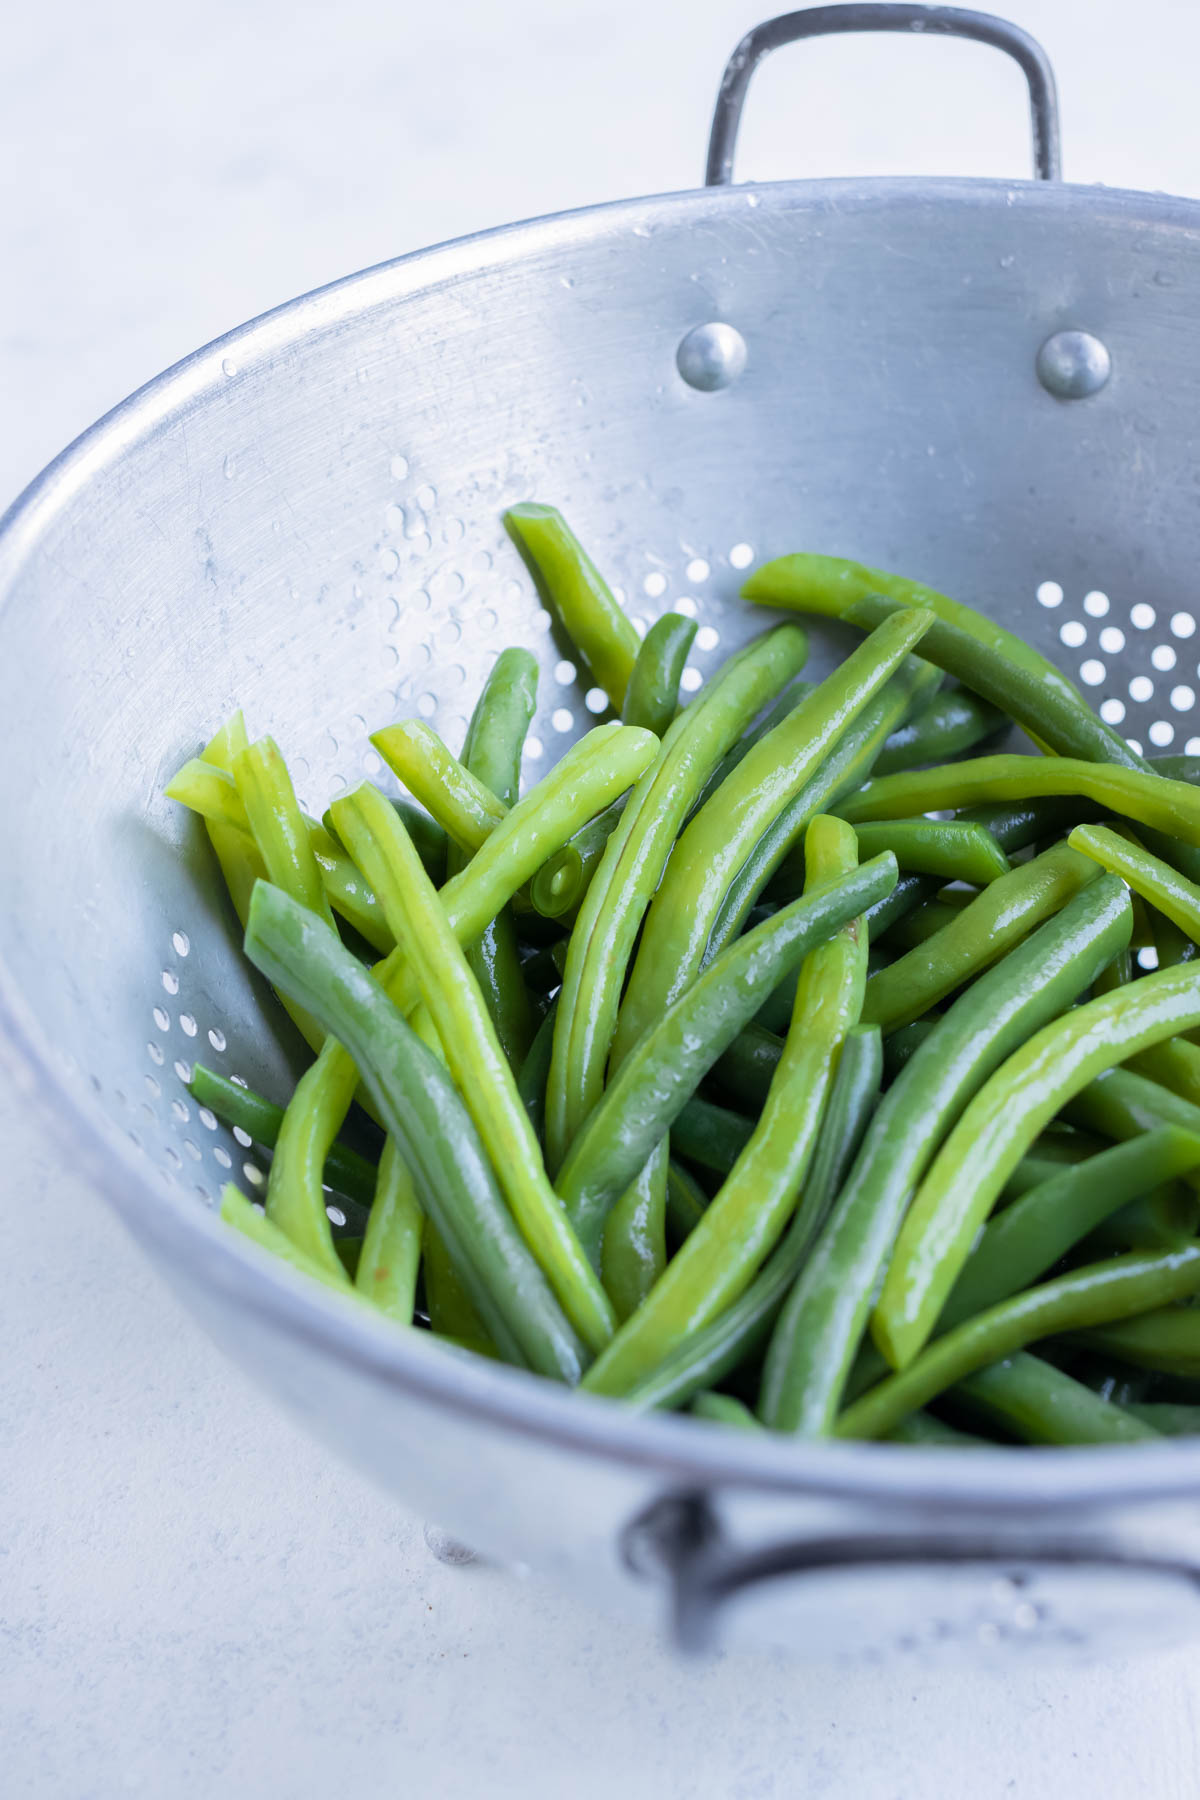 Boiled beans are drained using a colander.